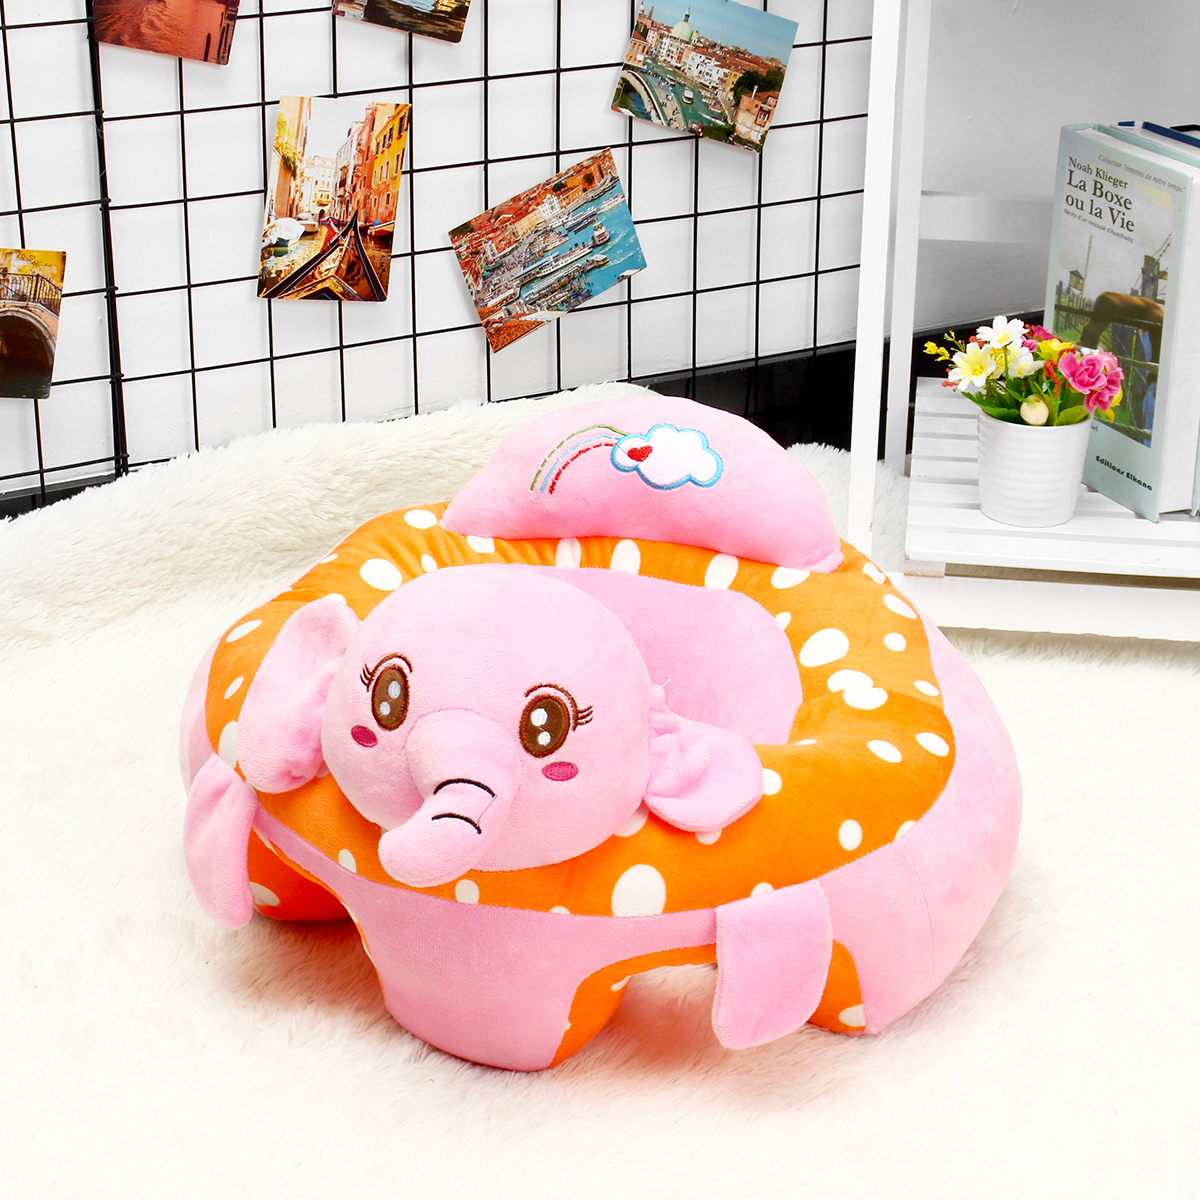 Baby-Soft-Learn-Sitting-Chair-Cushion-Training-Inflatable-Seat-Nursing-Pillows-Child-Safety-Seat-Bel-1422245